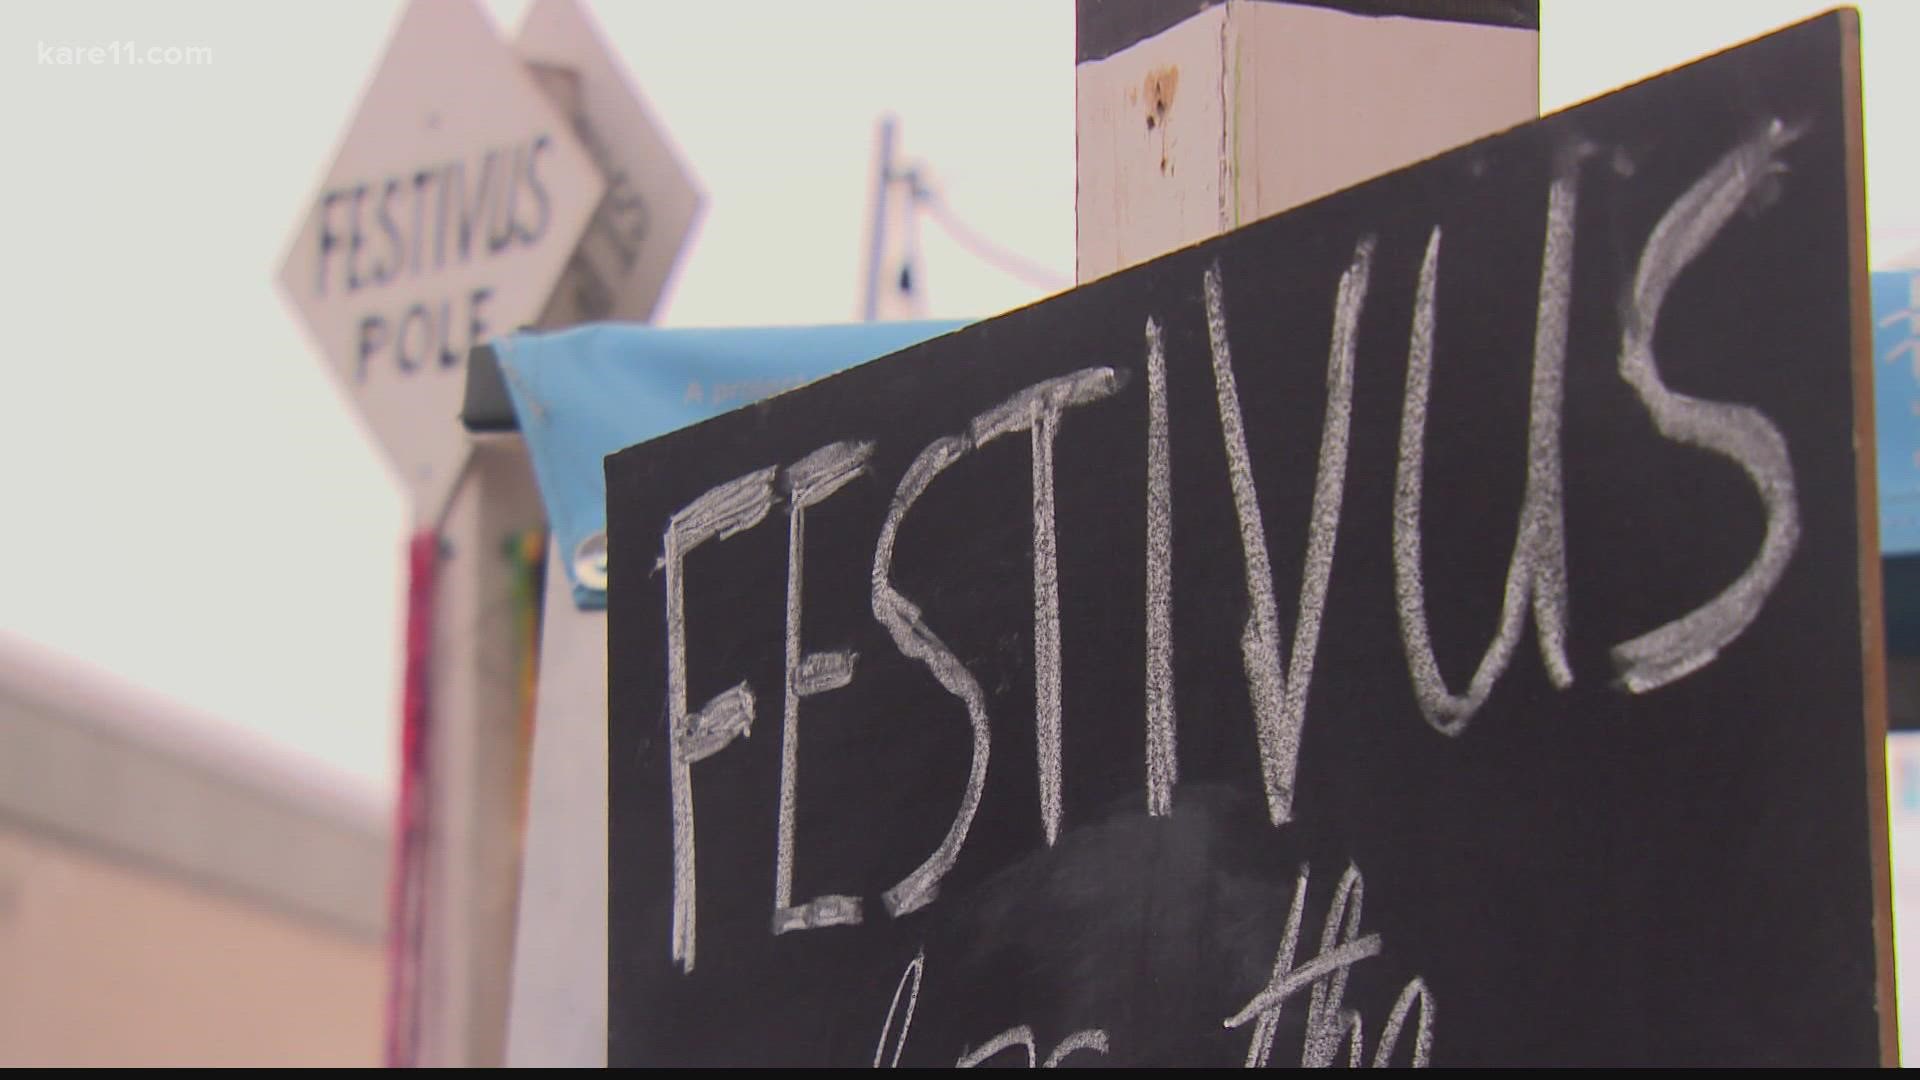 Looking for a place to air your grievances? Lowertown Arts District in St. Paul celebrates Festivus.